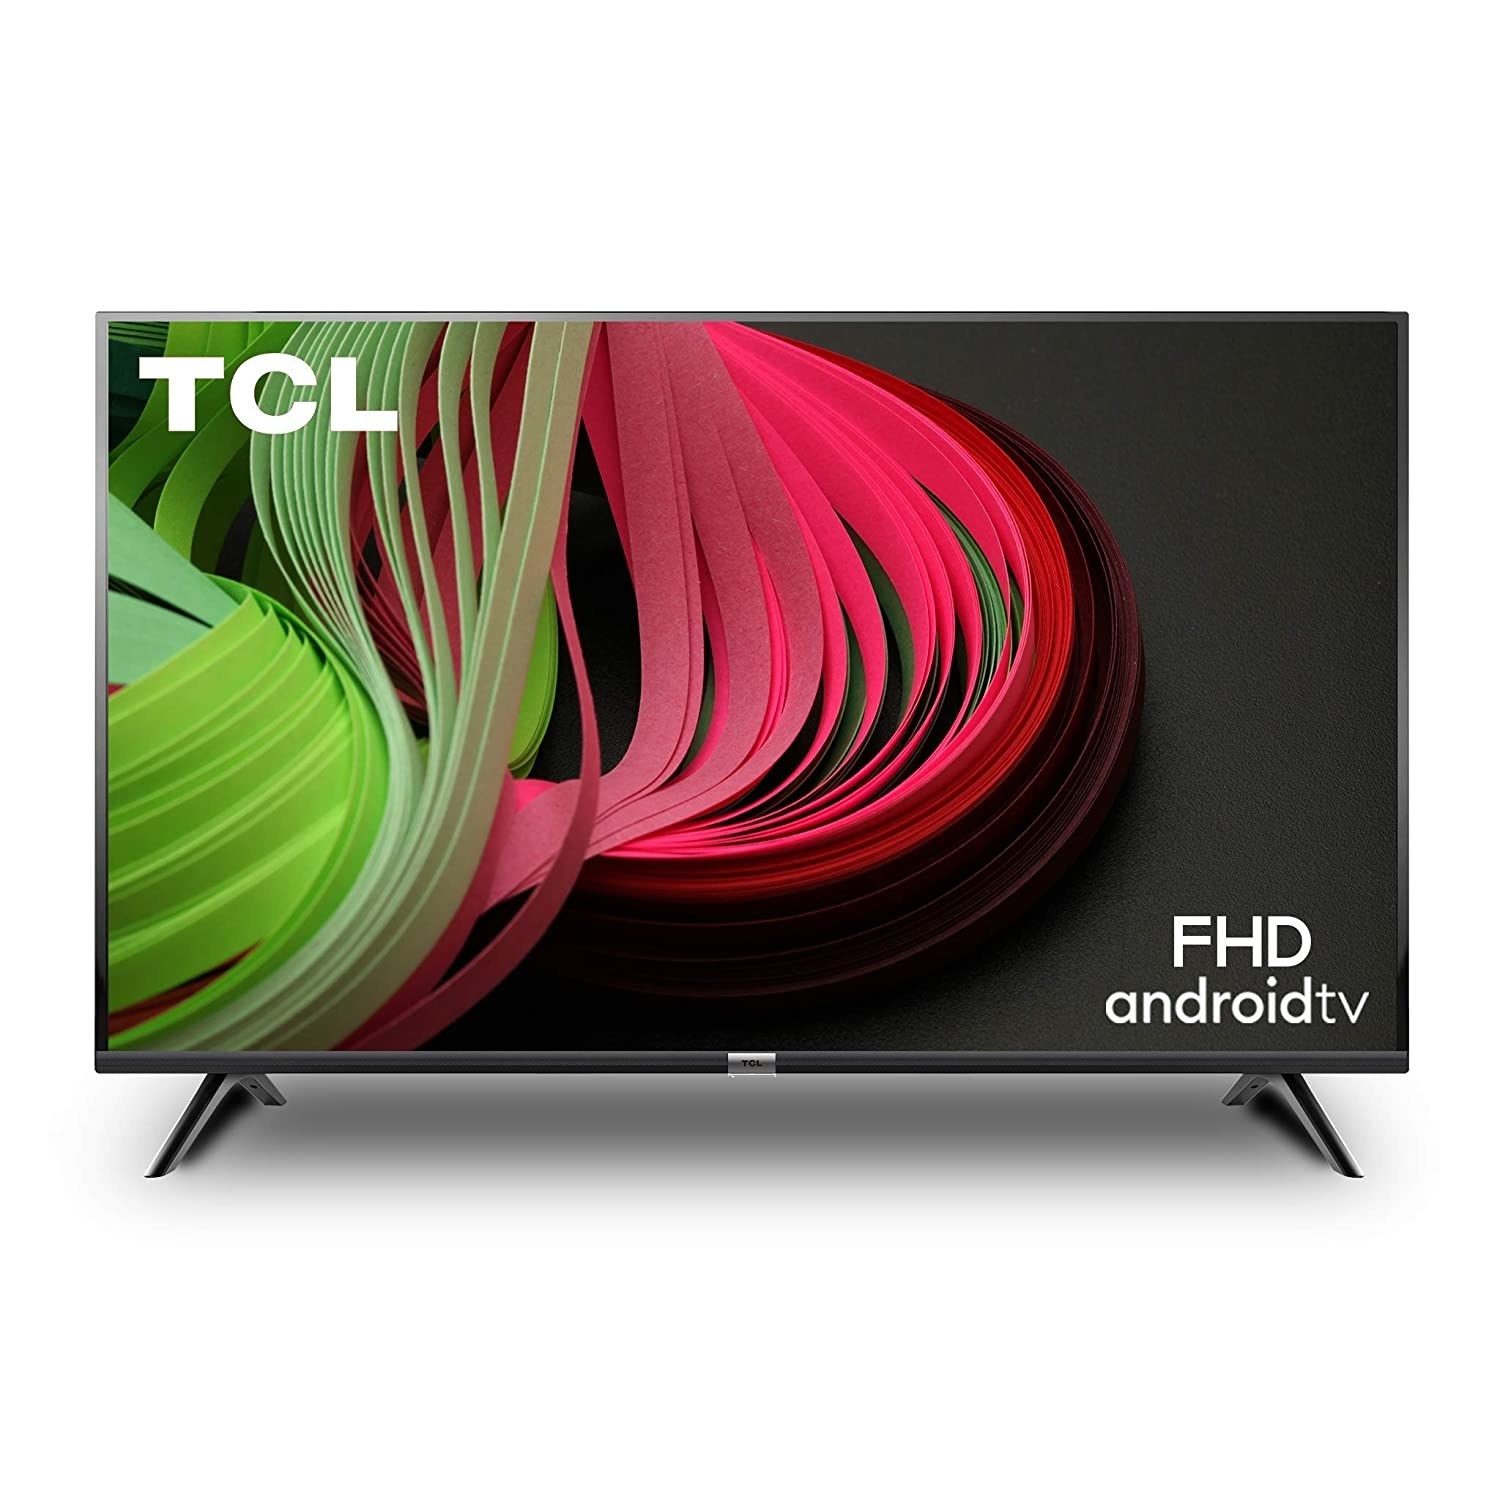 TCL tv with the loading screen